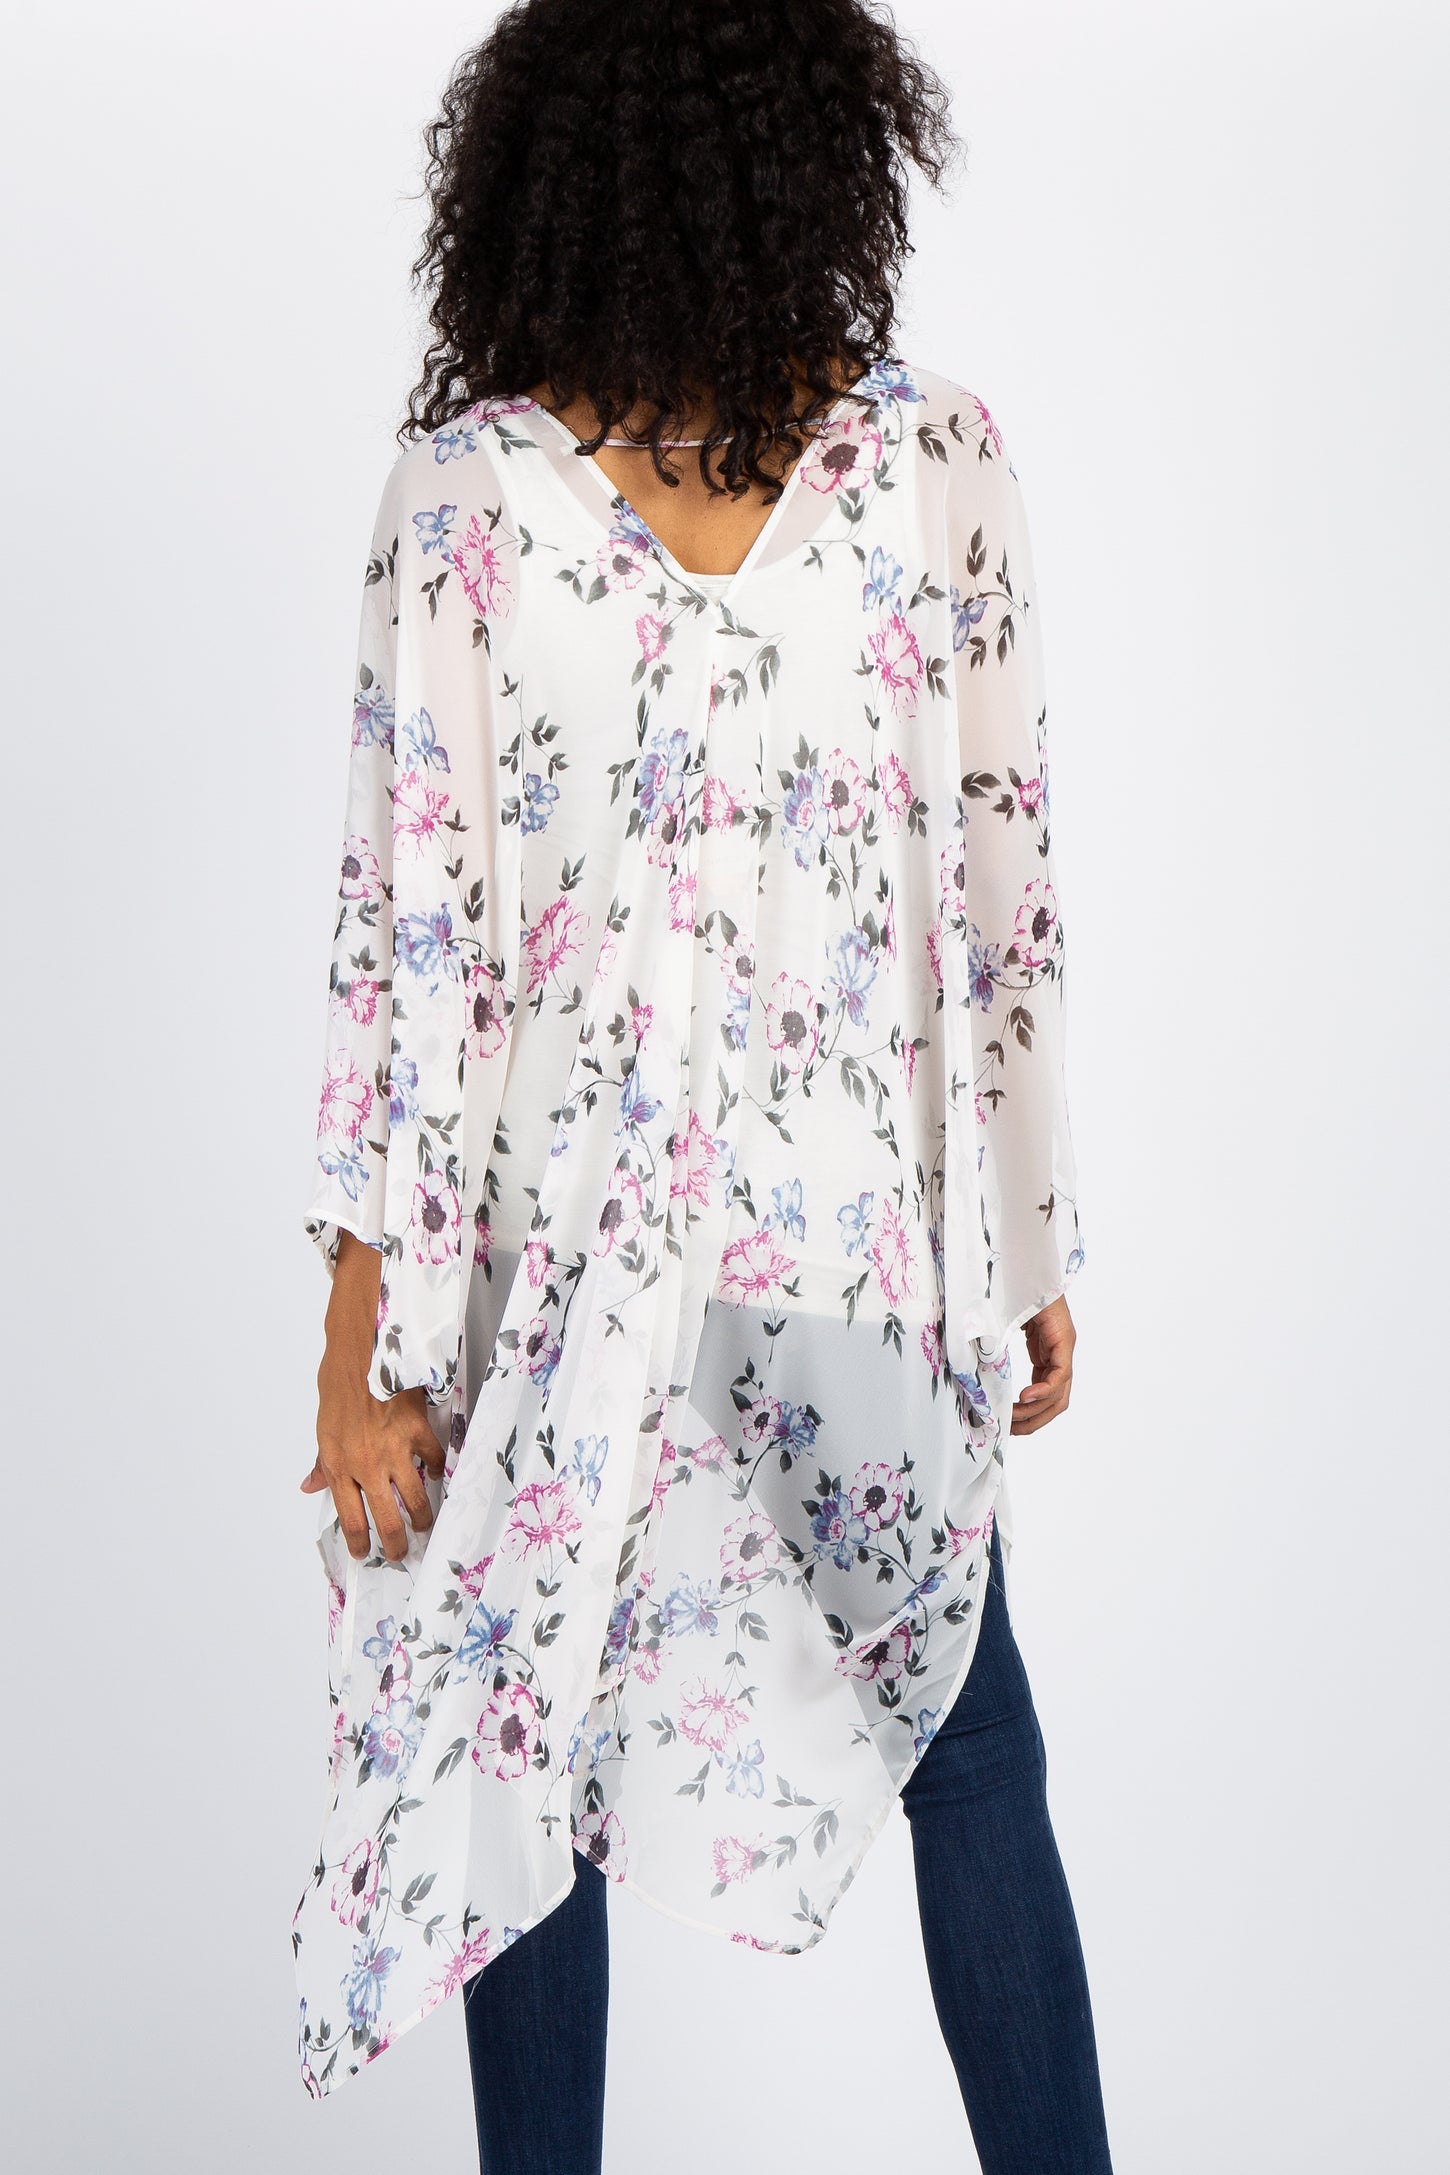 Ivory Floral Chiffon Oversized Maternity Cover Up